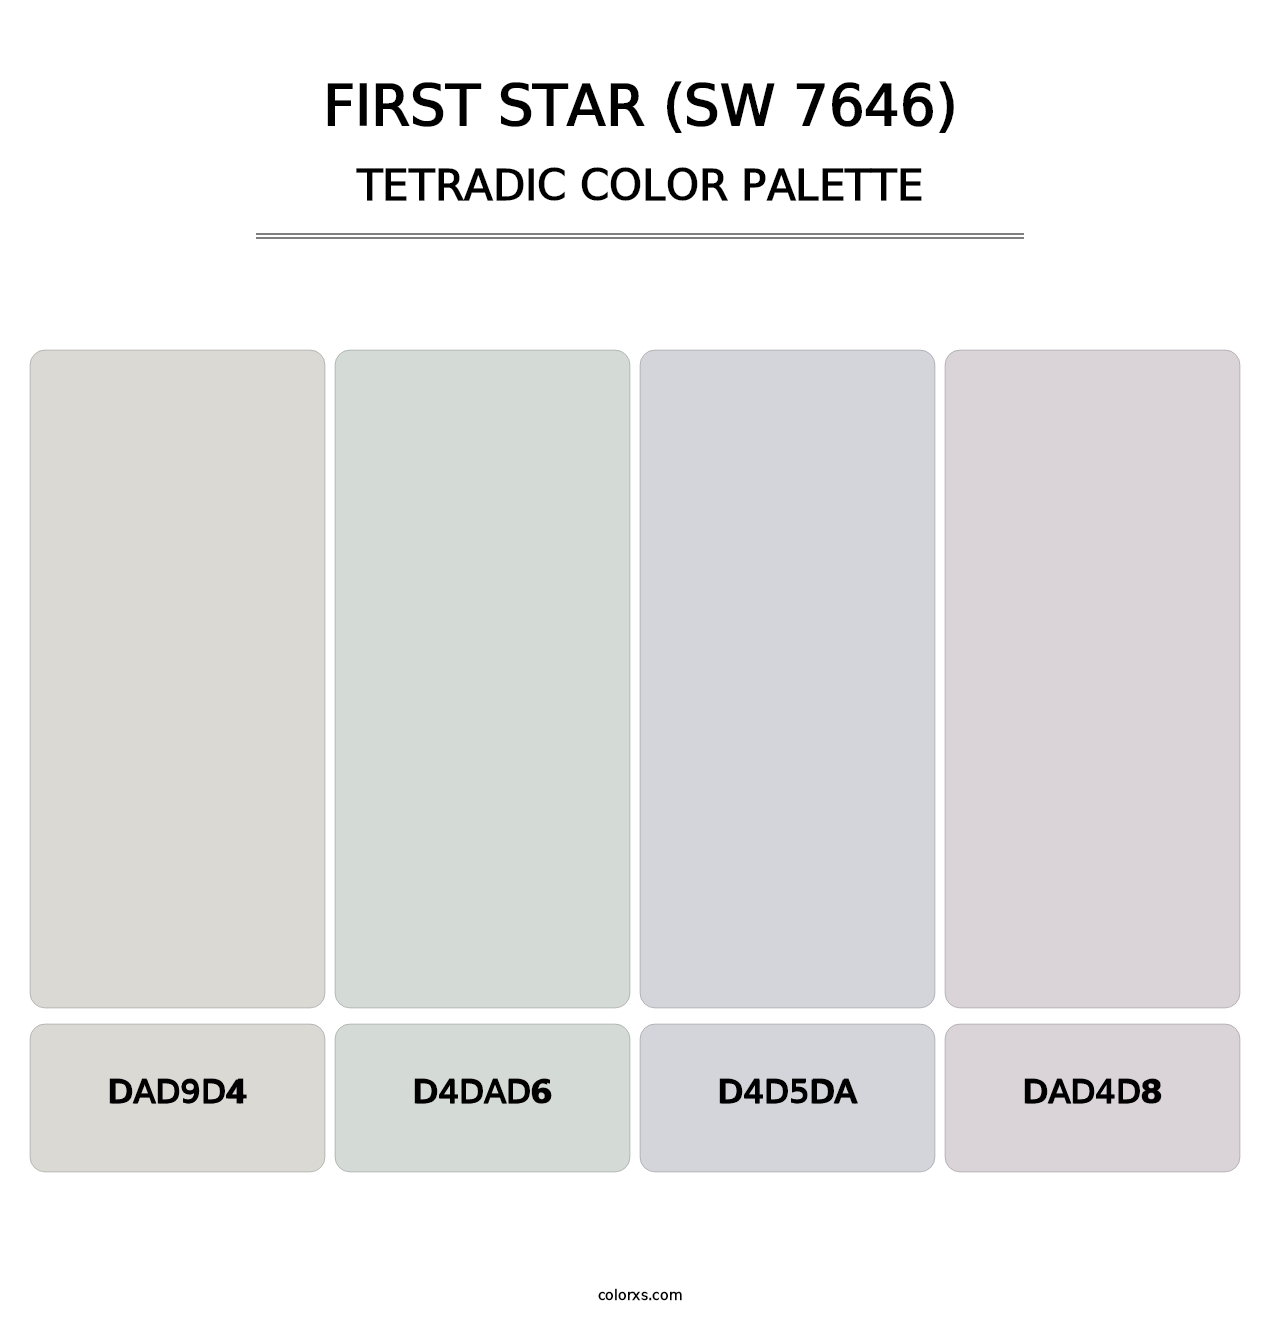 First Star (SW 7646) - Tetradic Color Palette